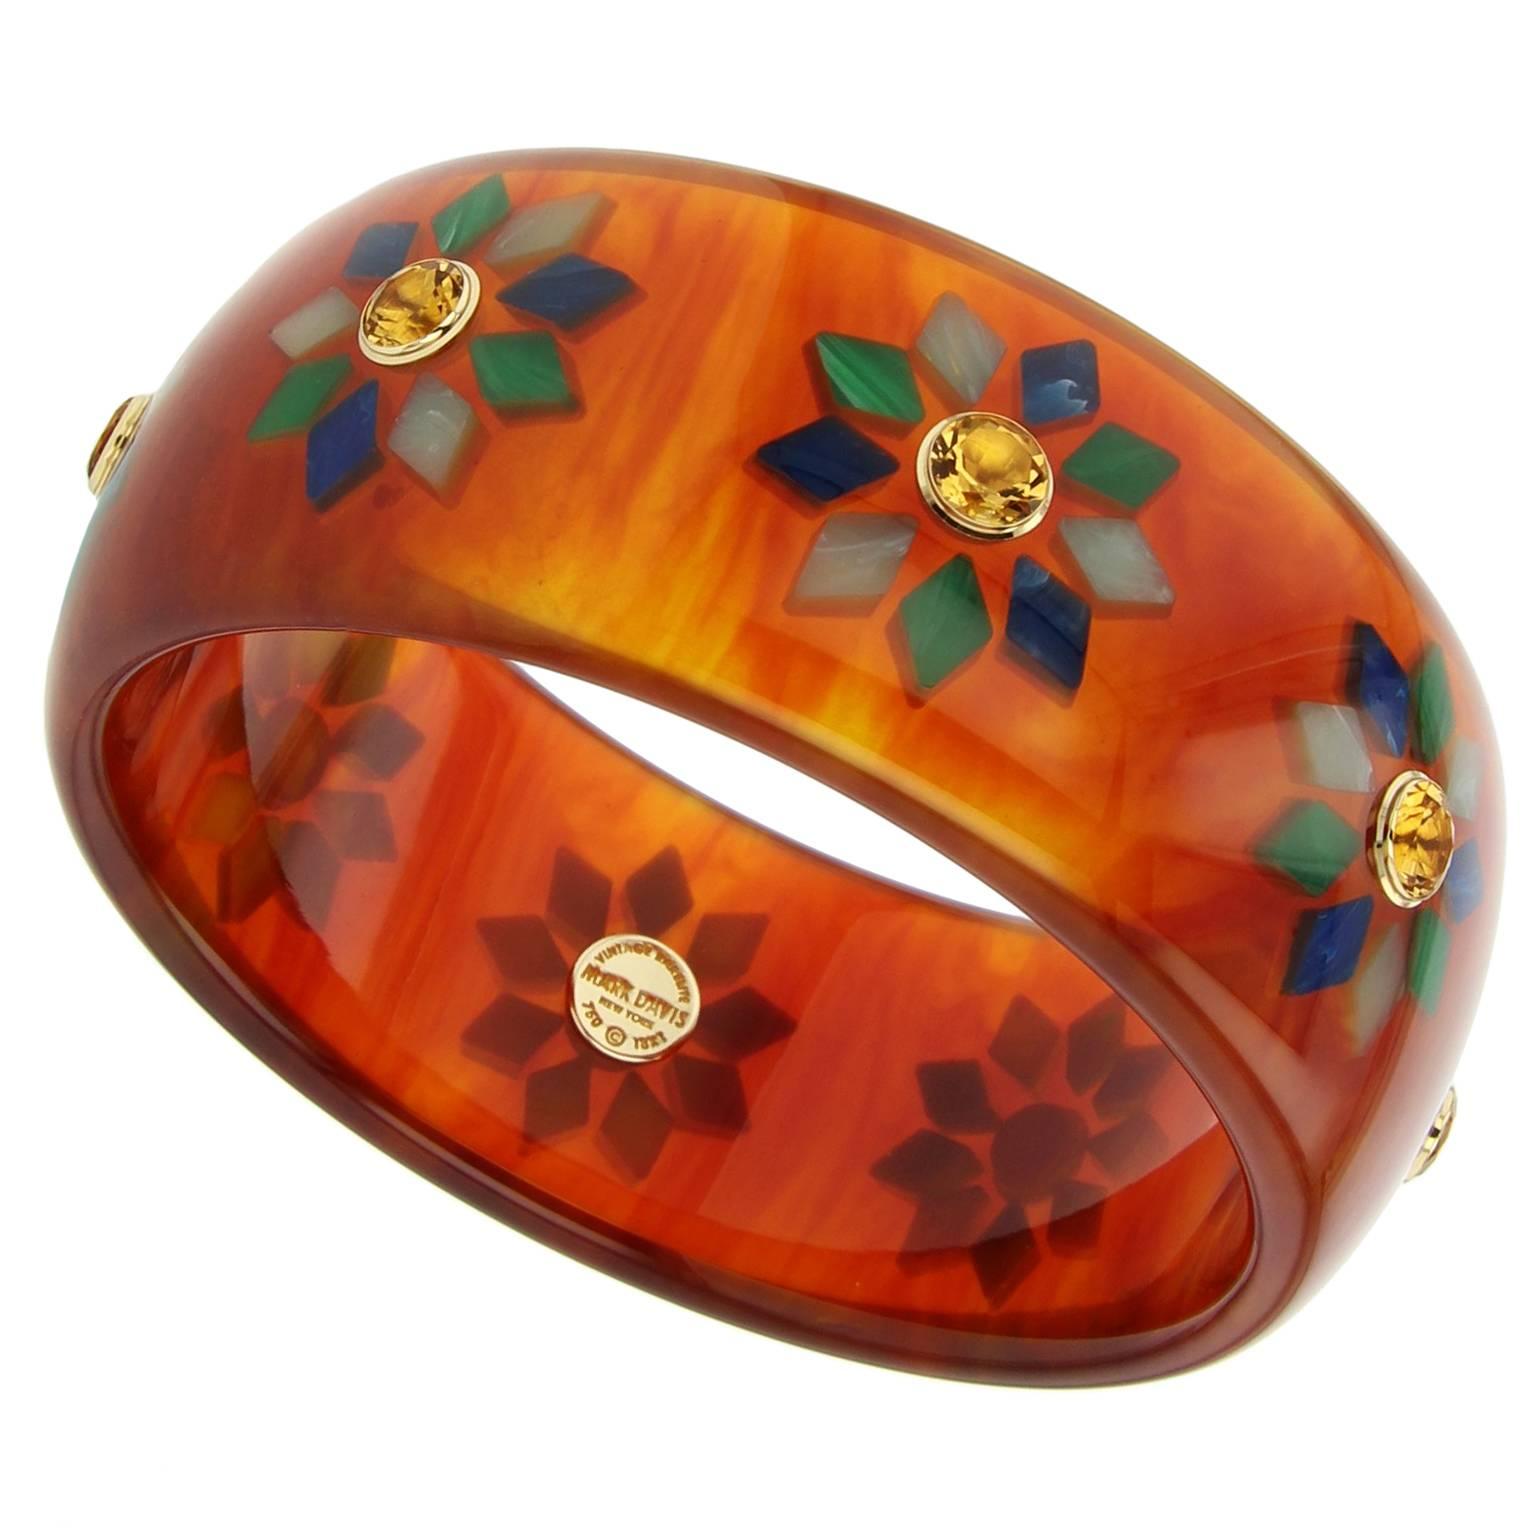 This unique and bold Mark Davis Collector bangle was handcrafted using vintage tortoise bakelite.  The geometric motif was precisely inlaid with diamond-shaped pieces of green and blue bakelite.  Each station is centered with a citrine, bezel-set in